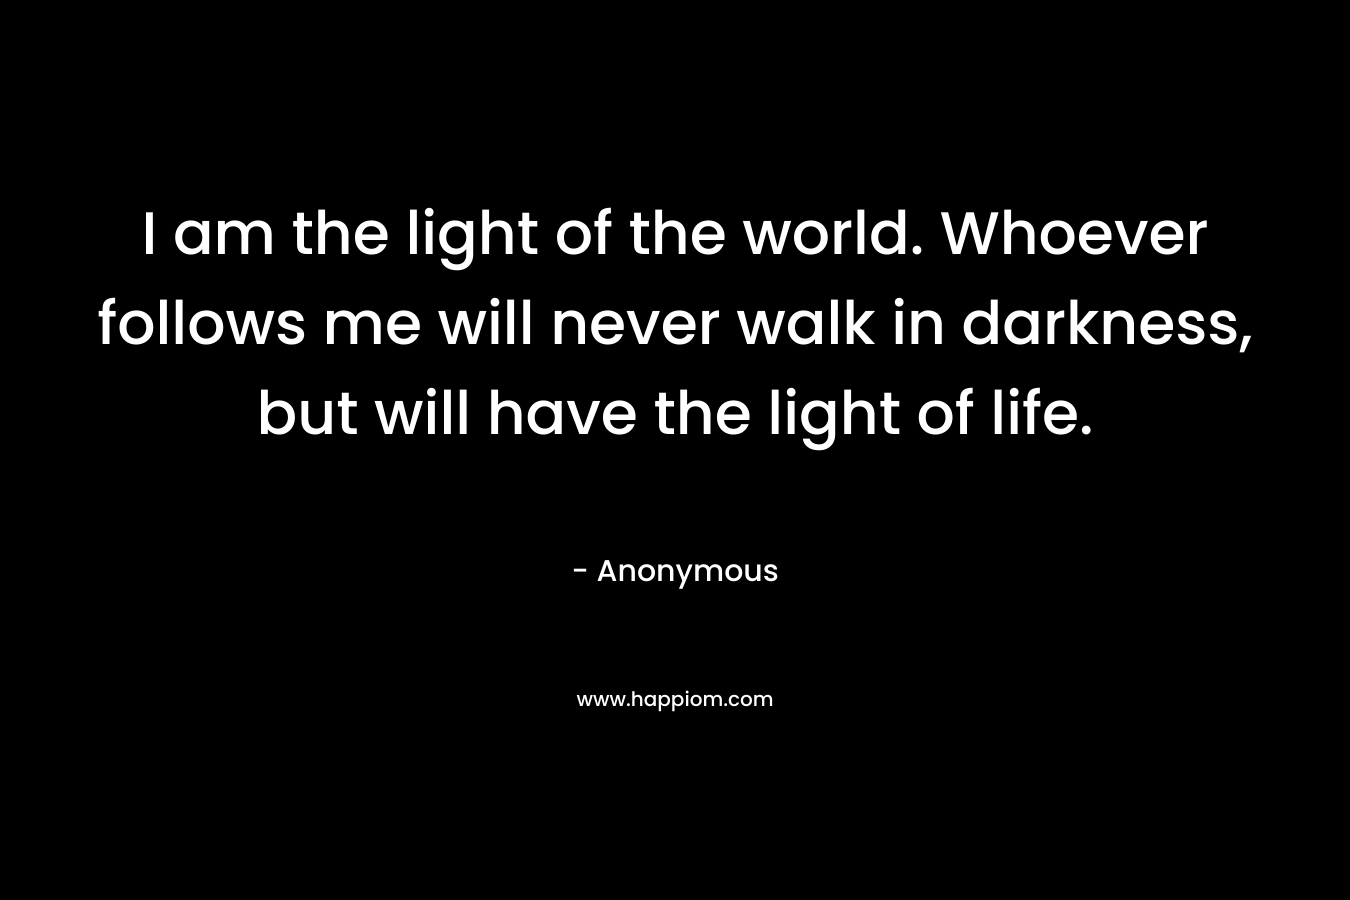 I am the light of the world. Whoever follows me will never walk in darkness, but will have the light of life.